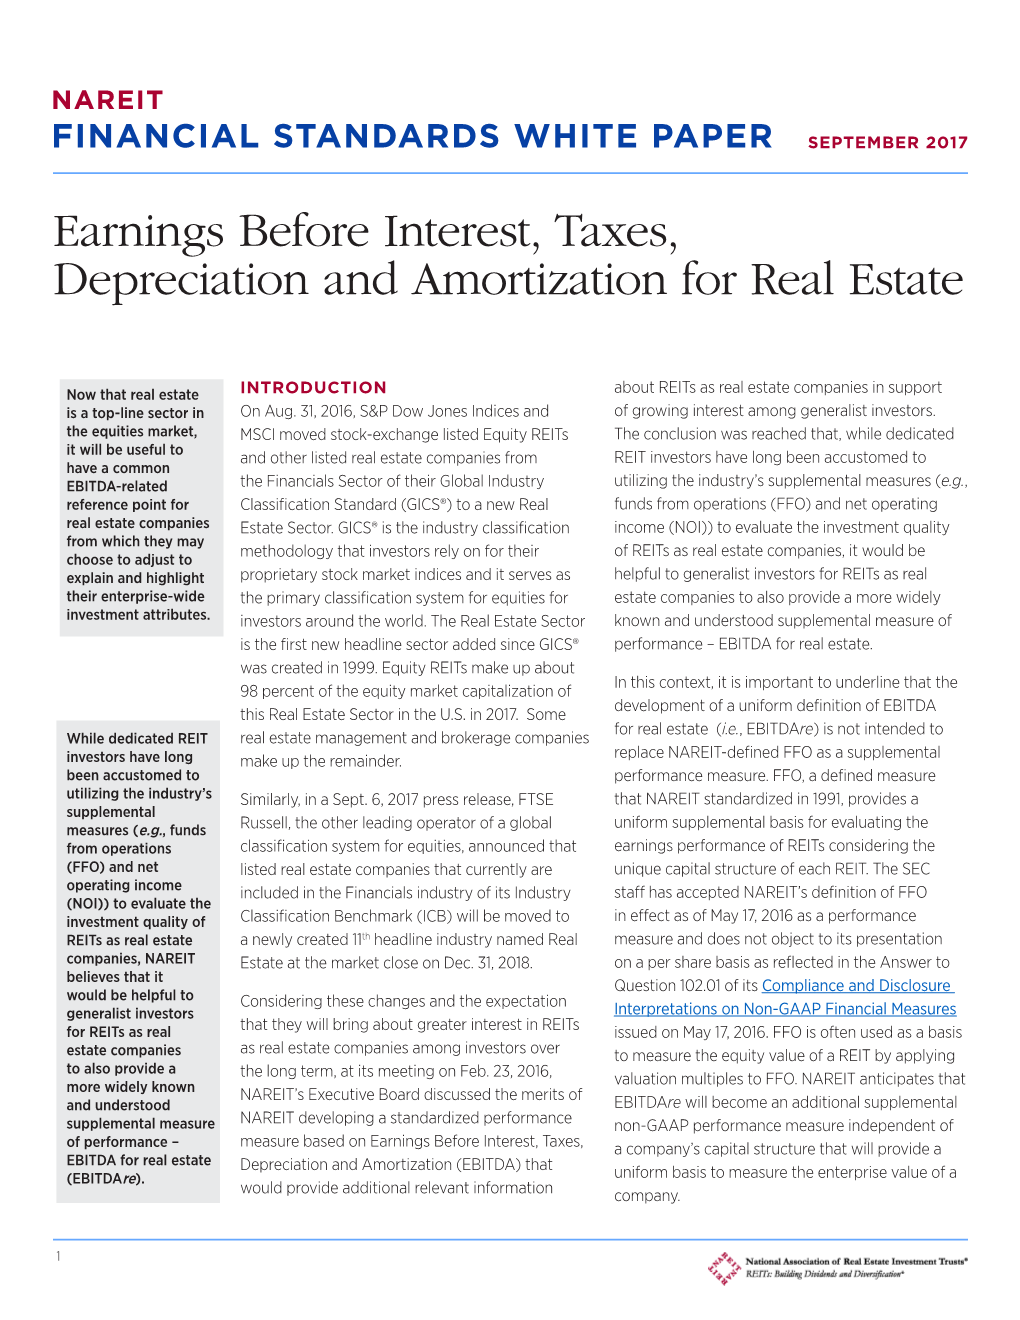 Earnings Before Interest, Taxes, Depreciation and Amortization for Real Estate